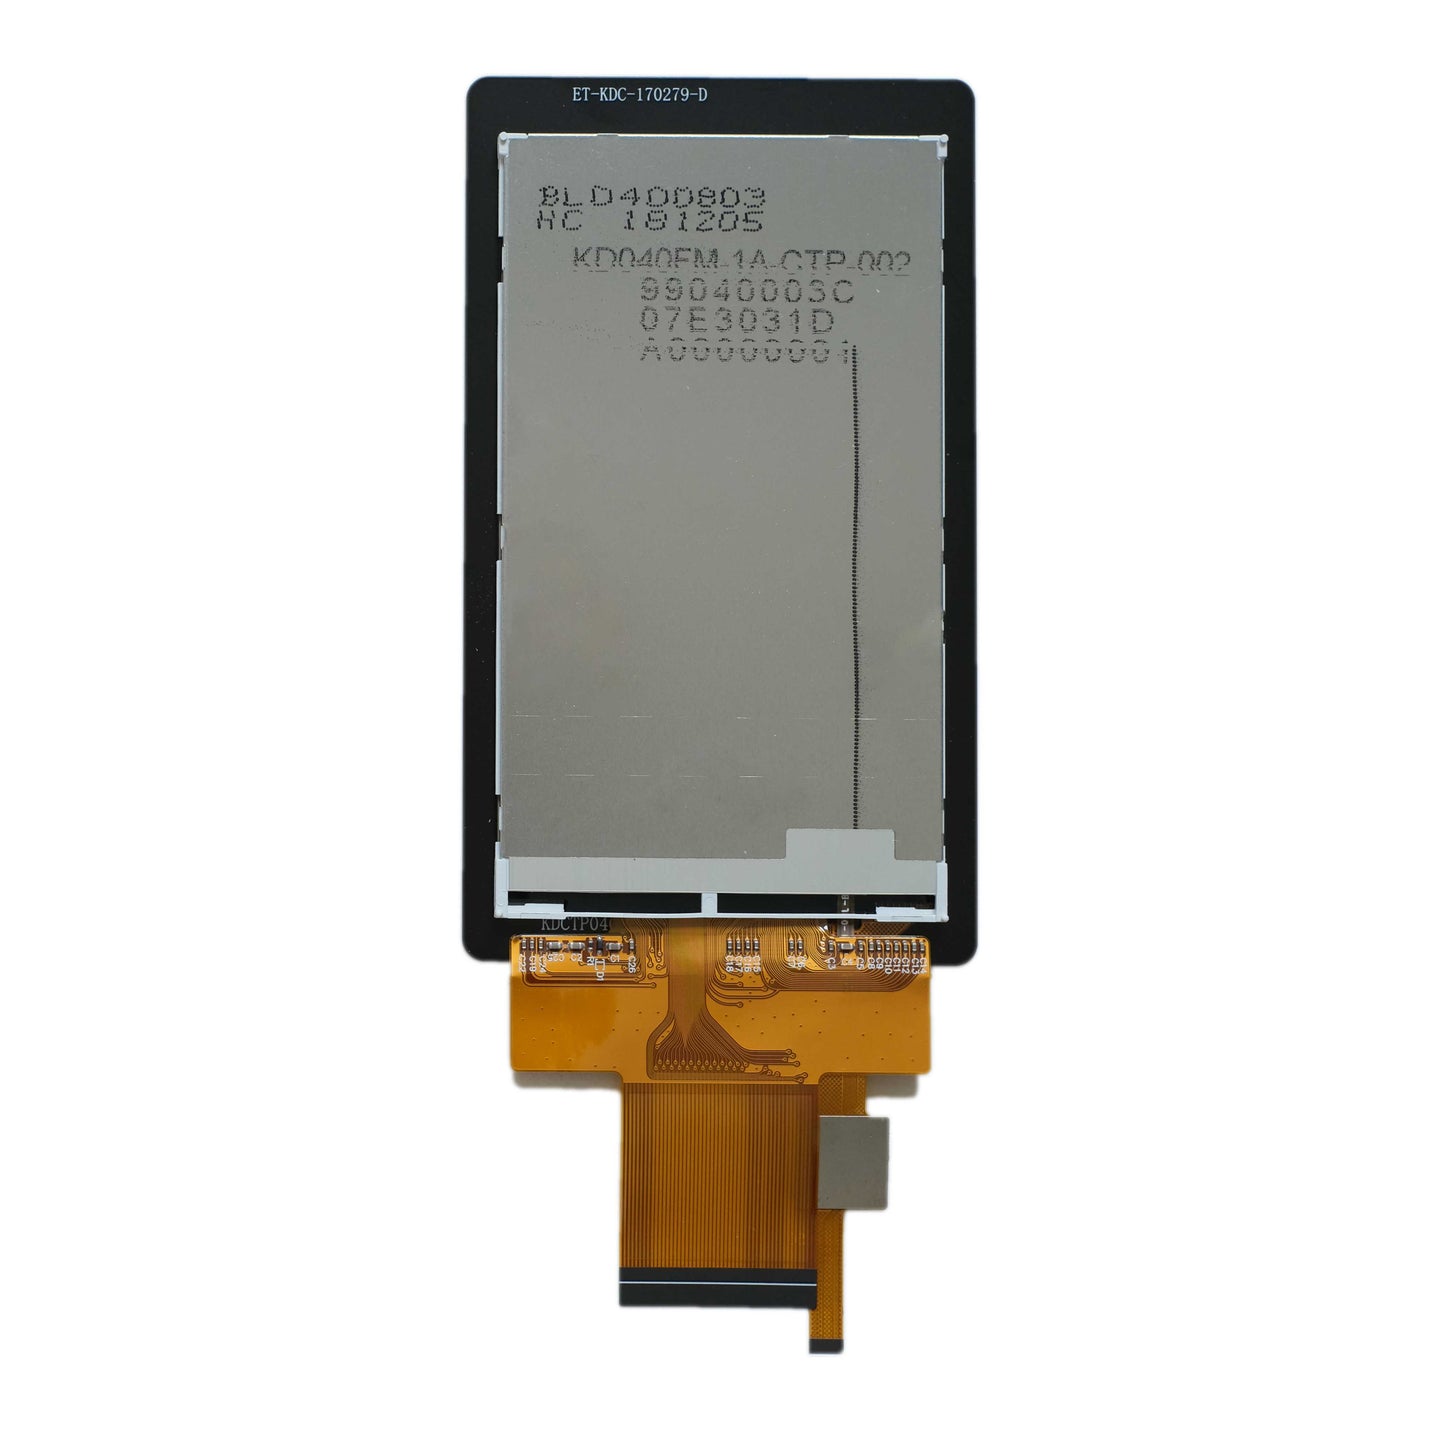 back of 4.0-inch IPS display panel with 480x800 resolution, capacitive touch, supporting SPI and RGB interfaces